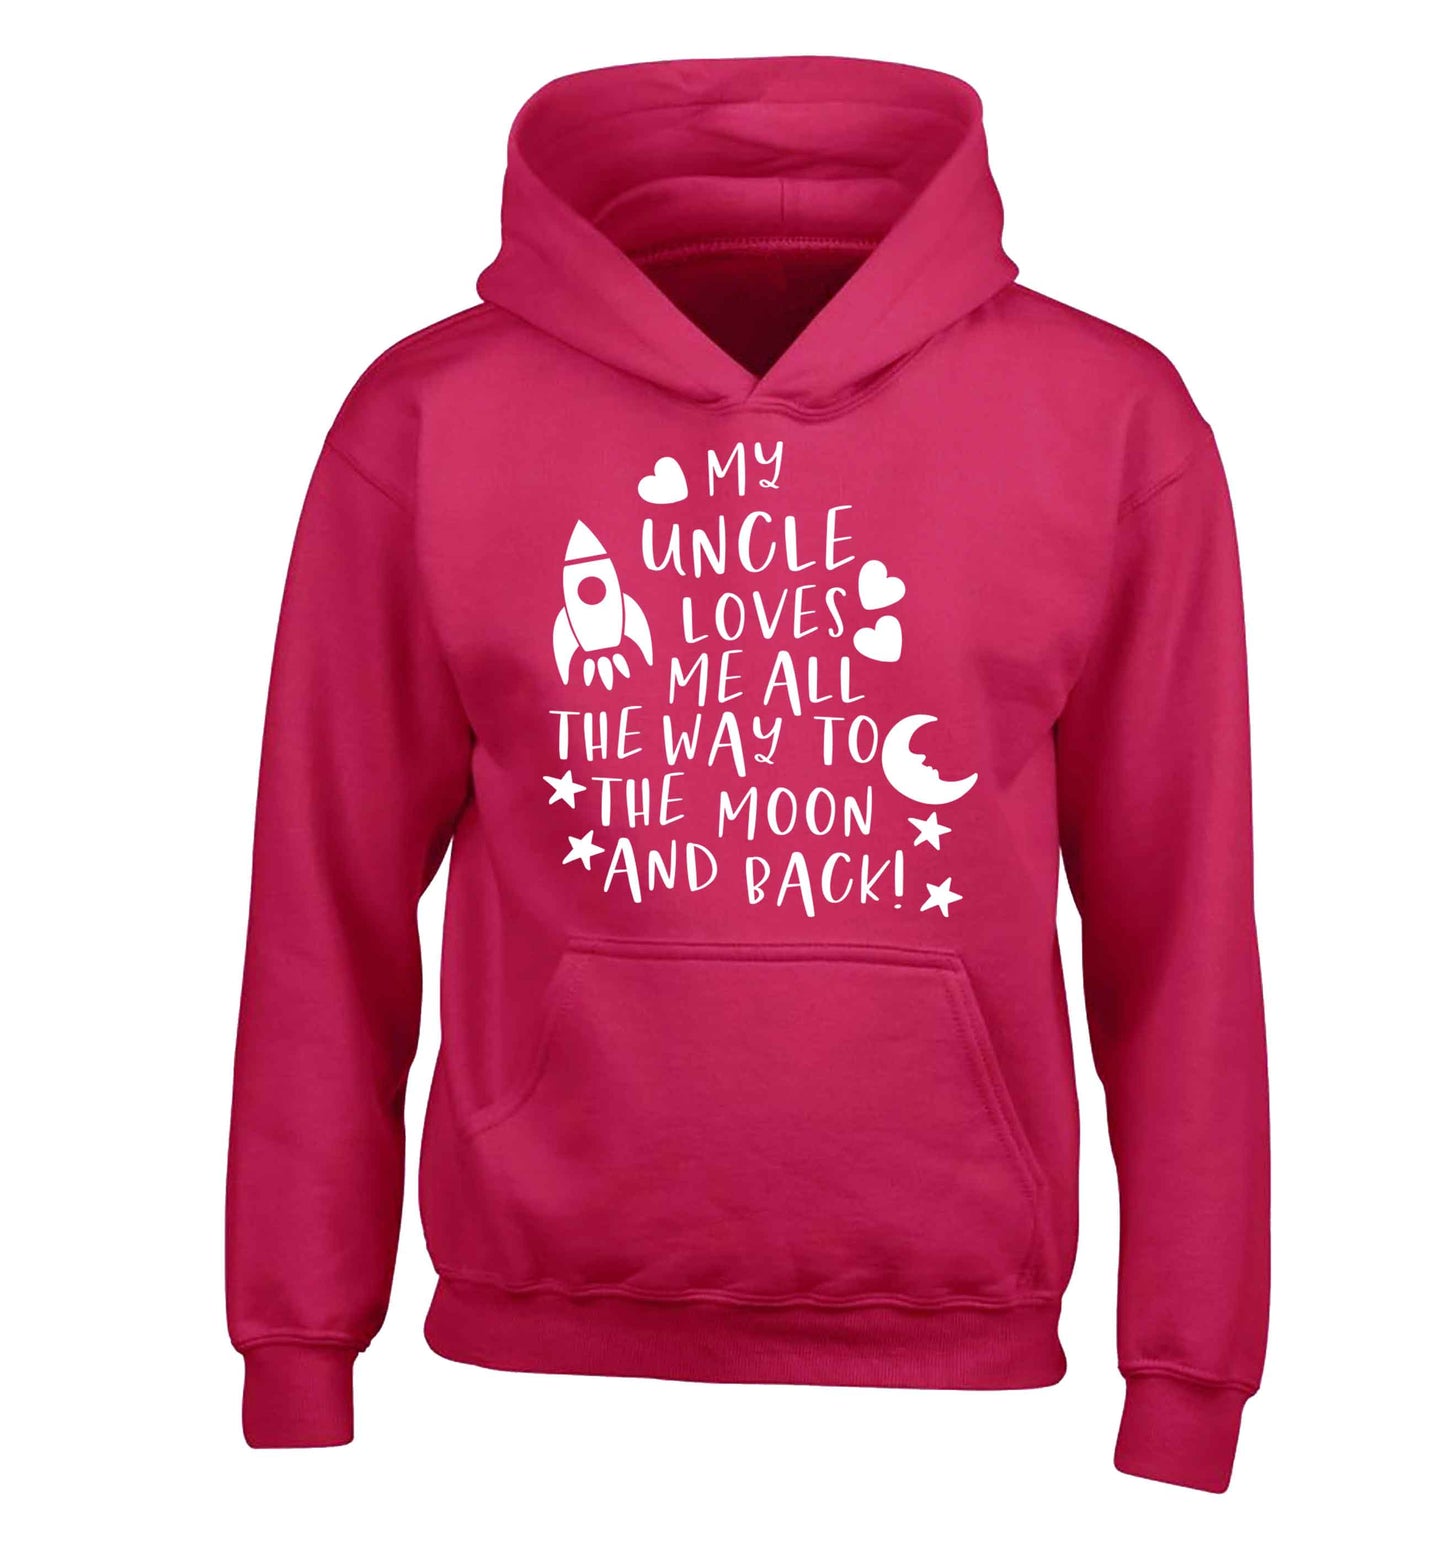 My uncle loves me all the way to the moon and back children's pink hoodie 12-13 Years